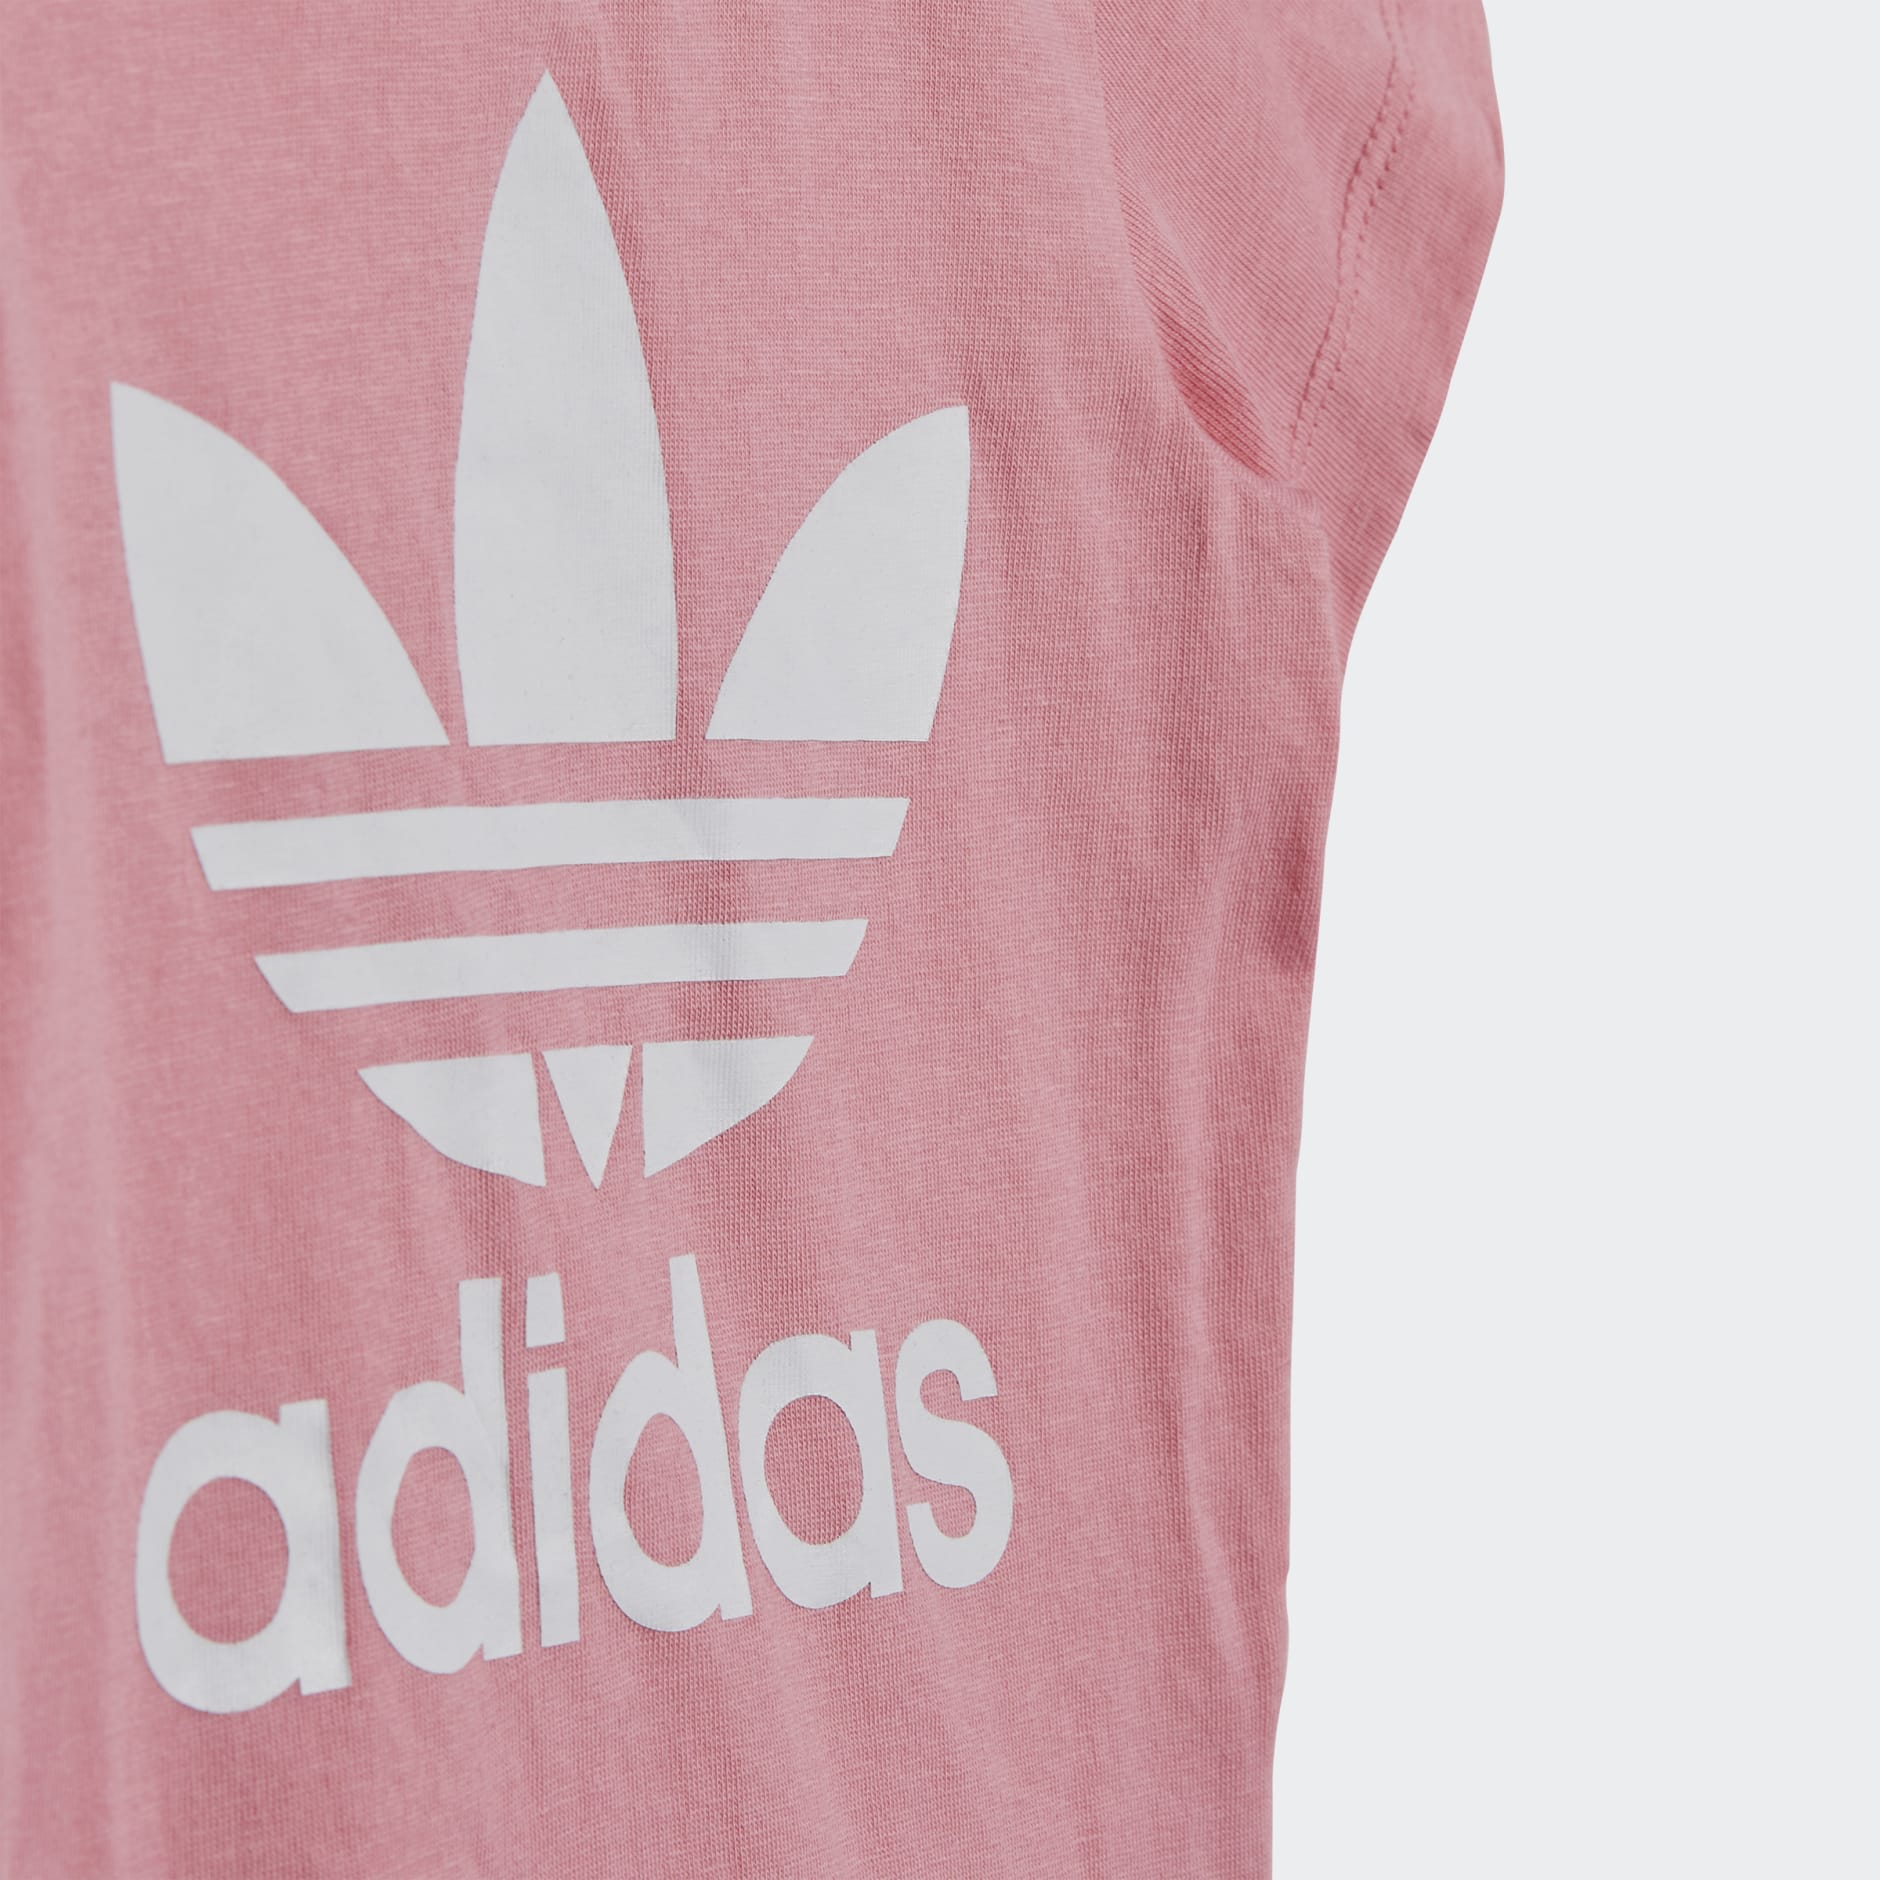 Clothing - Trefoil Tee - Pink | adidas South Africa